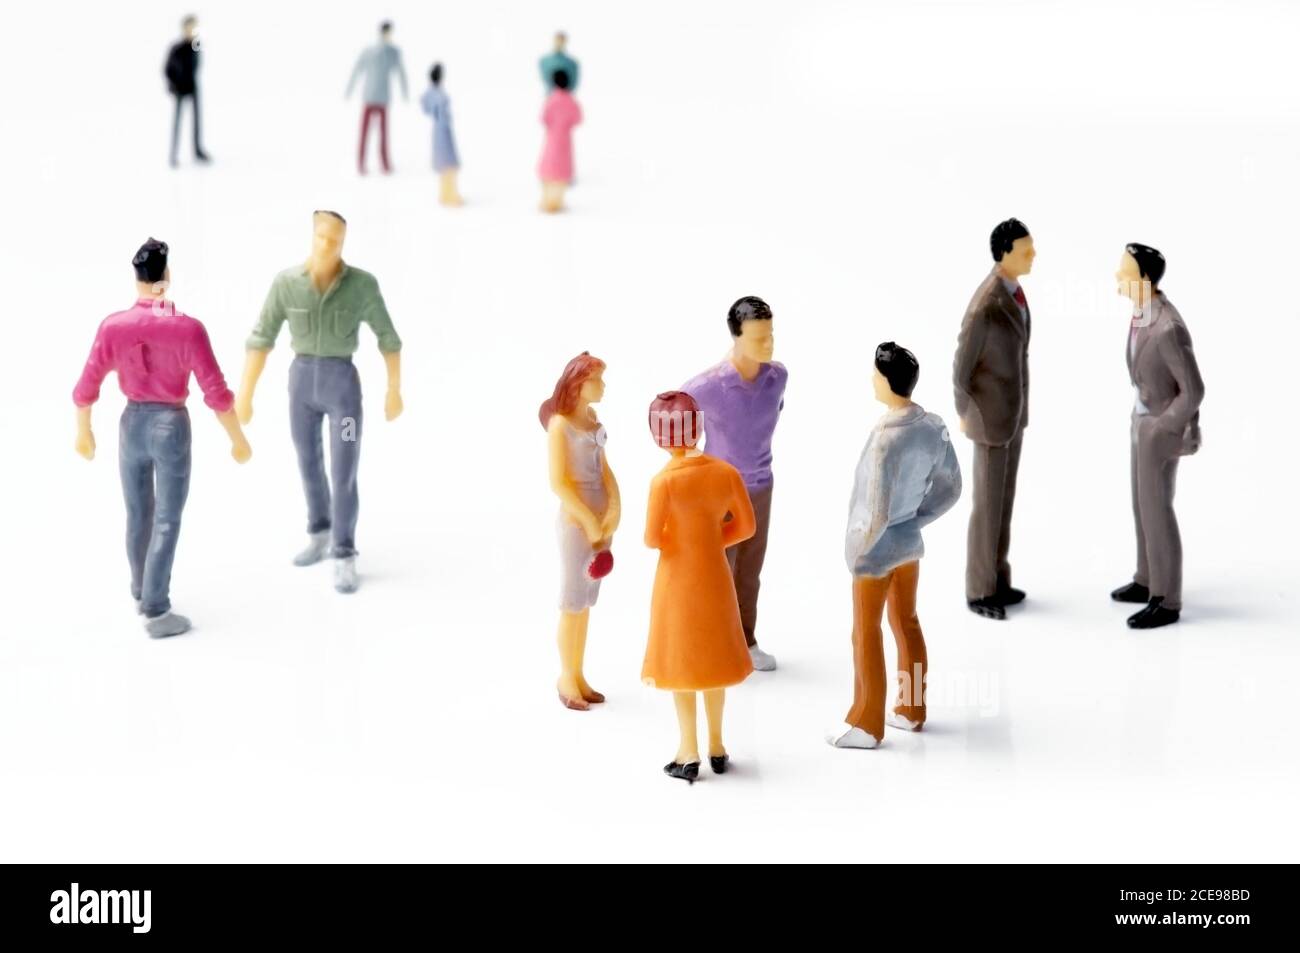 A Group of Figurine People on a White Backdrop Stock Photo